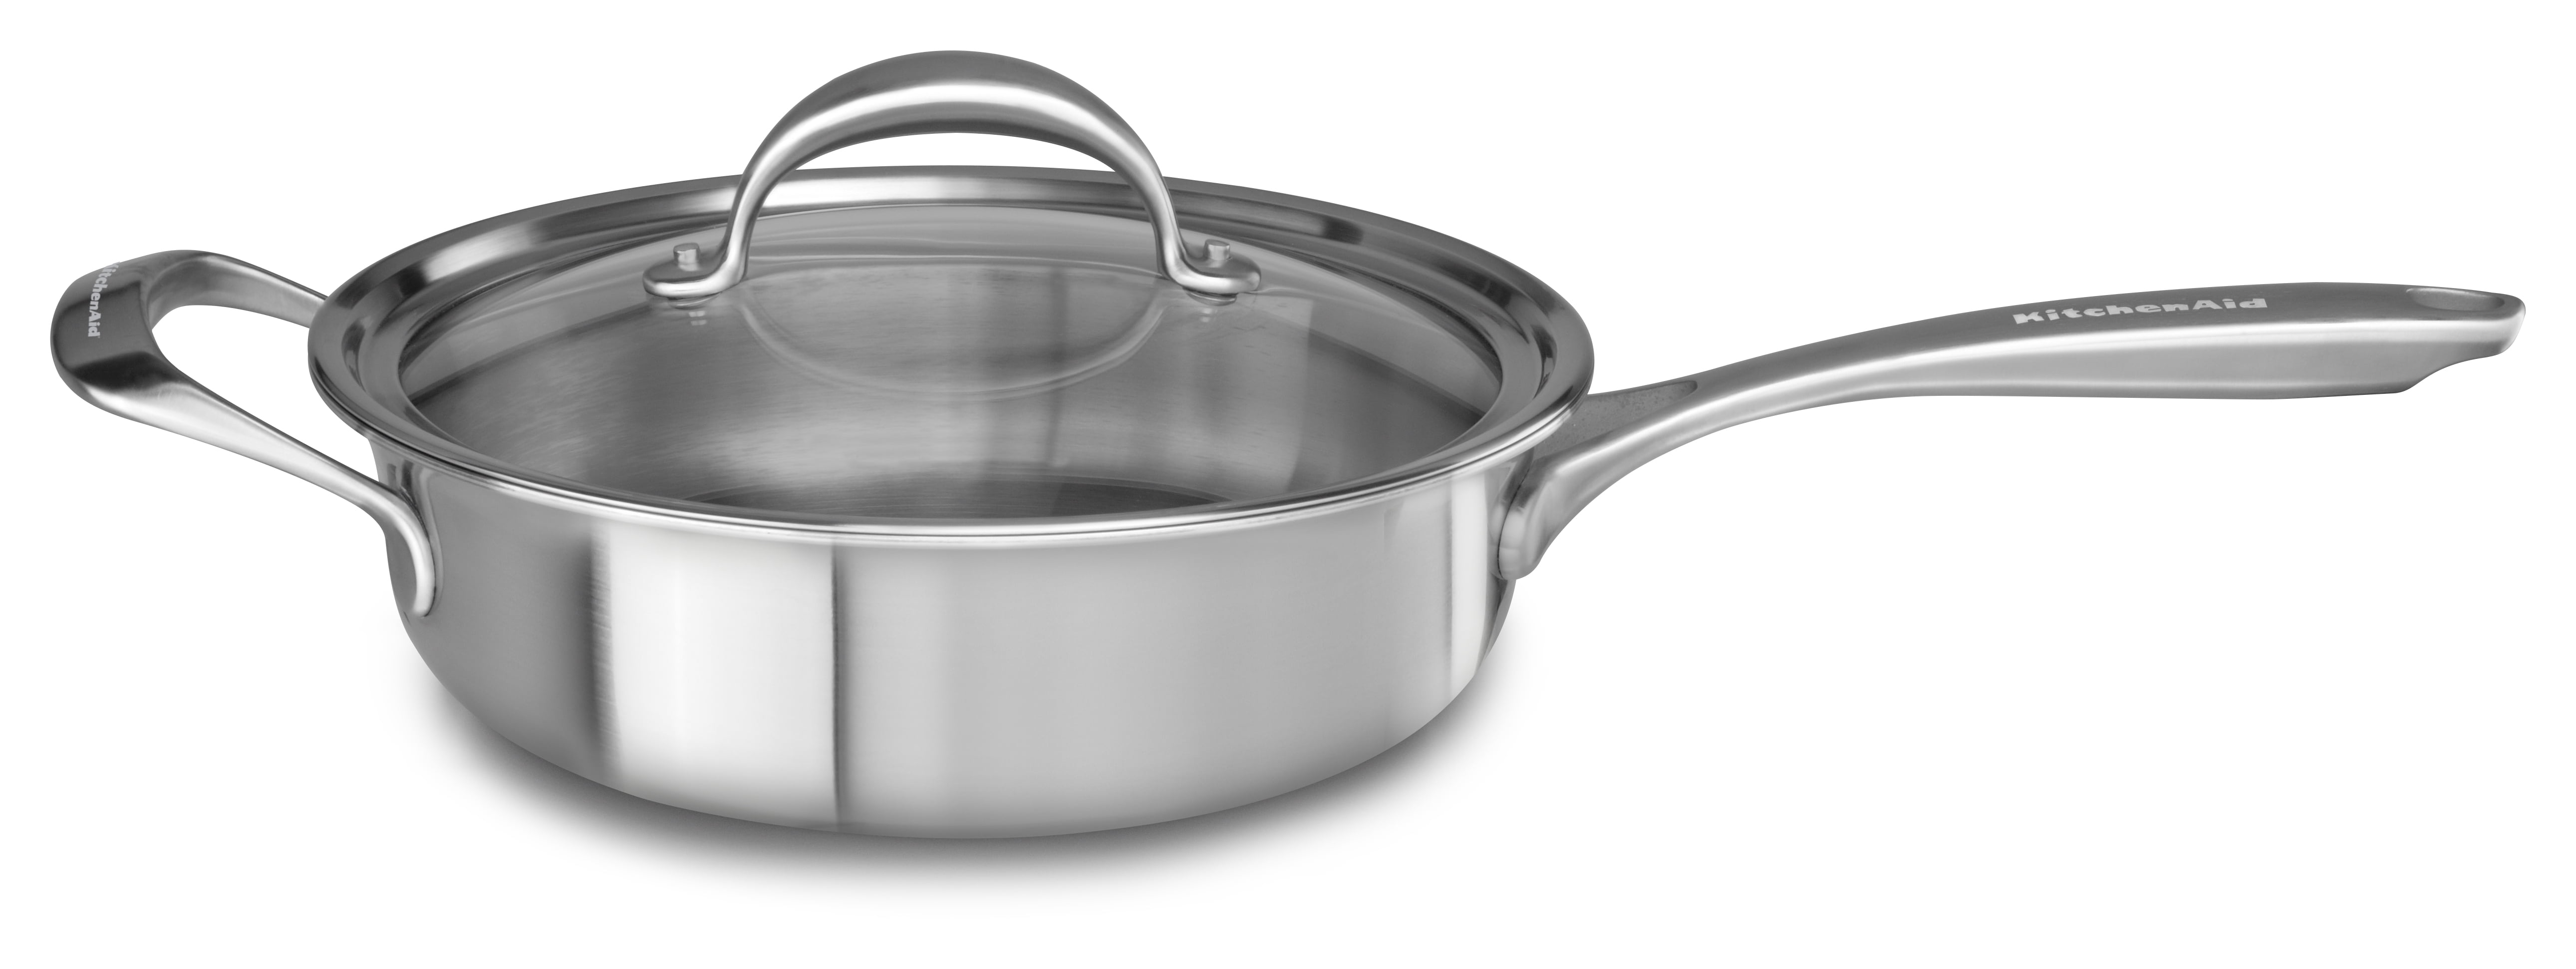 KitchenAid 5-Ply Clad Stainless Steel 3-qt. Sauce Pan